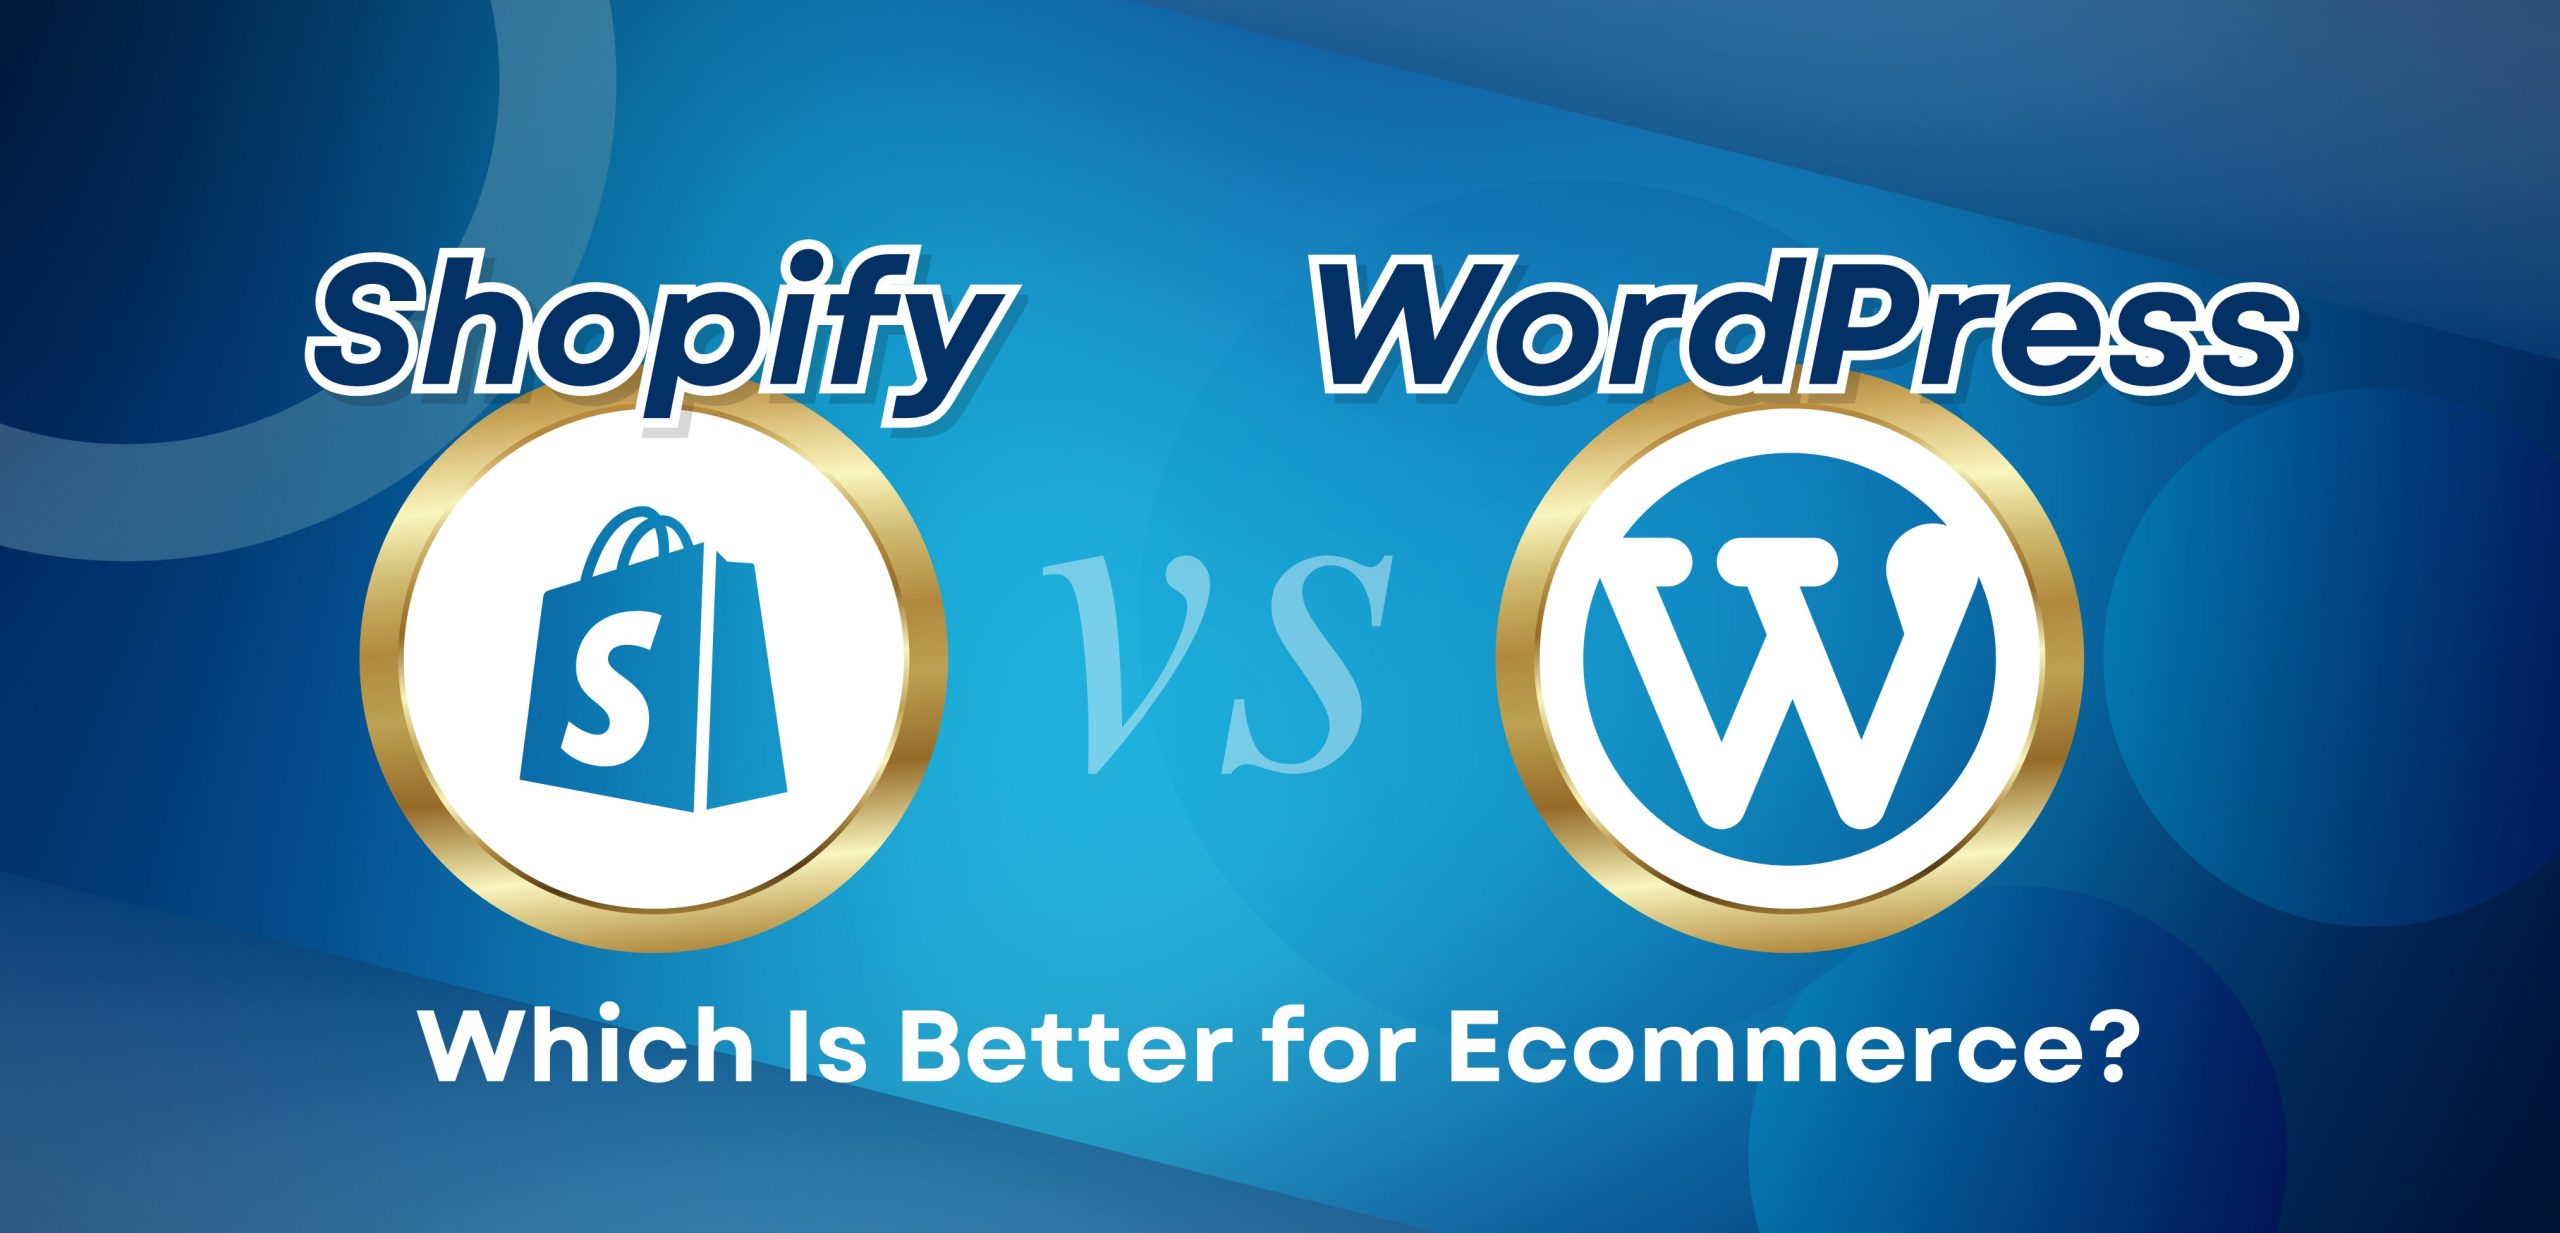 Shopify vs. WordPress: Which Is Better for E-commerce?